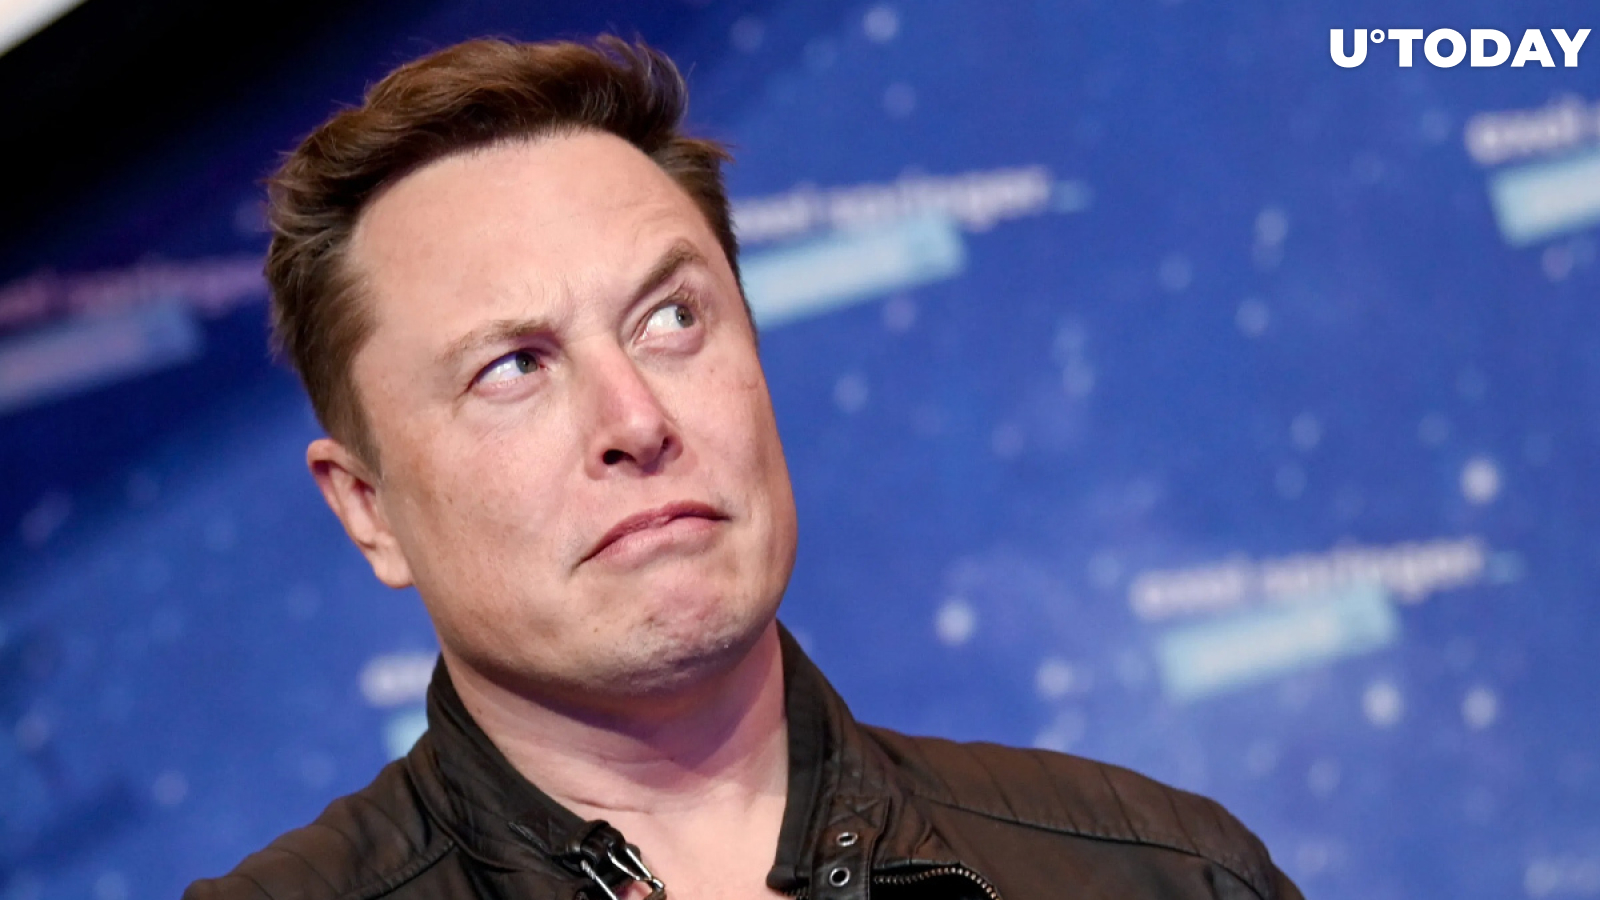 Elon Musk Rumored to Be Under SEC Investigation Over Dogecoin Tweets: Media Reports